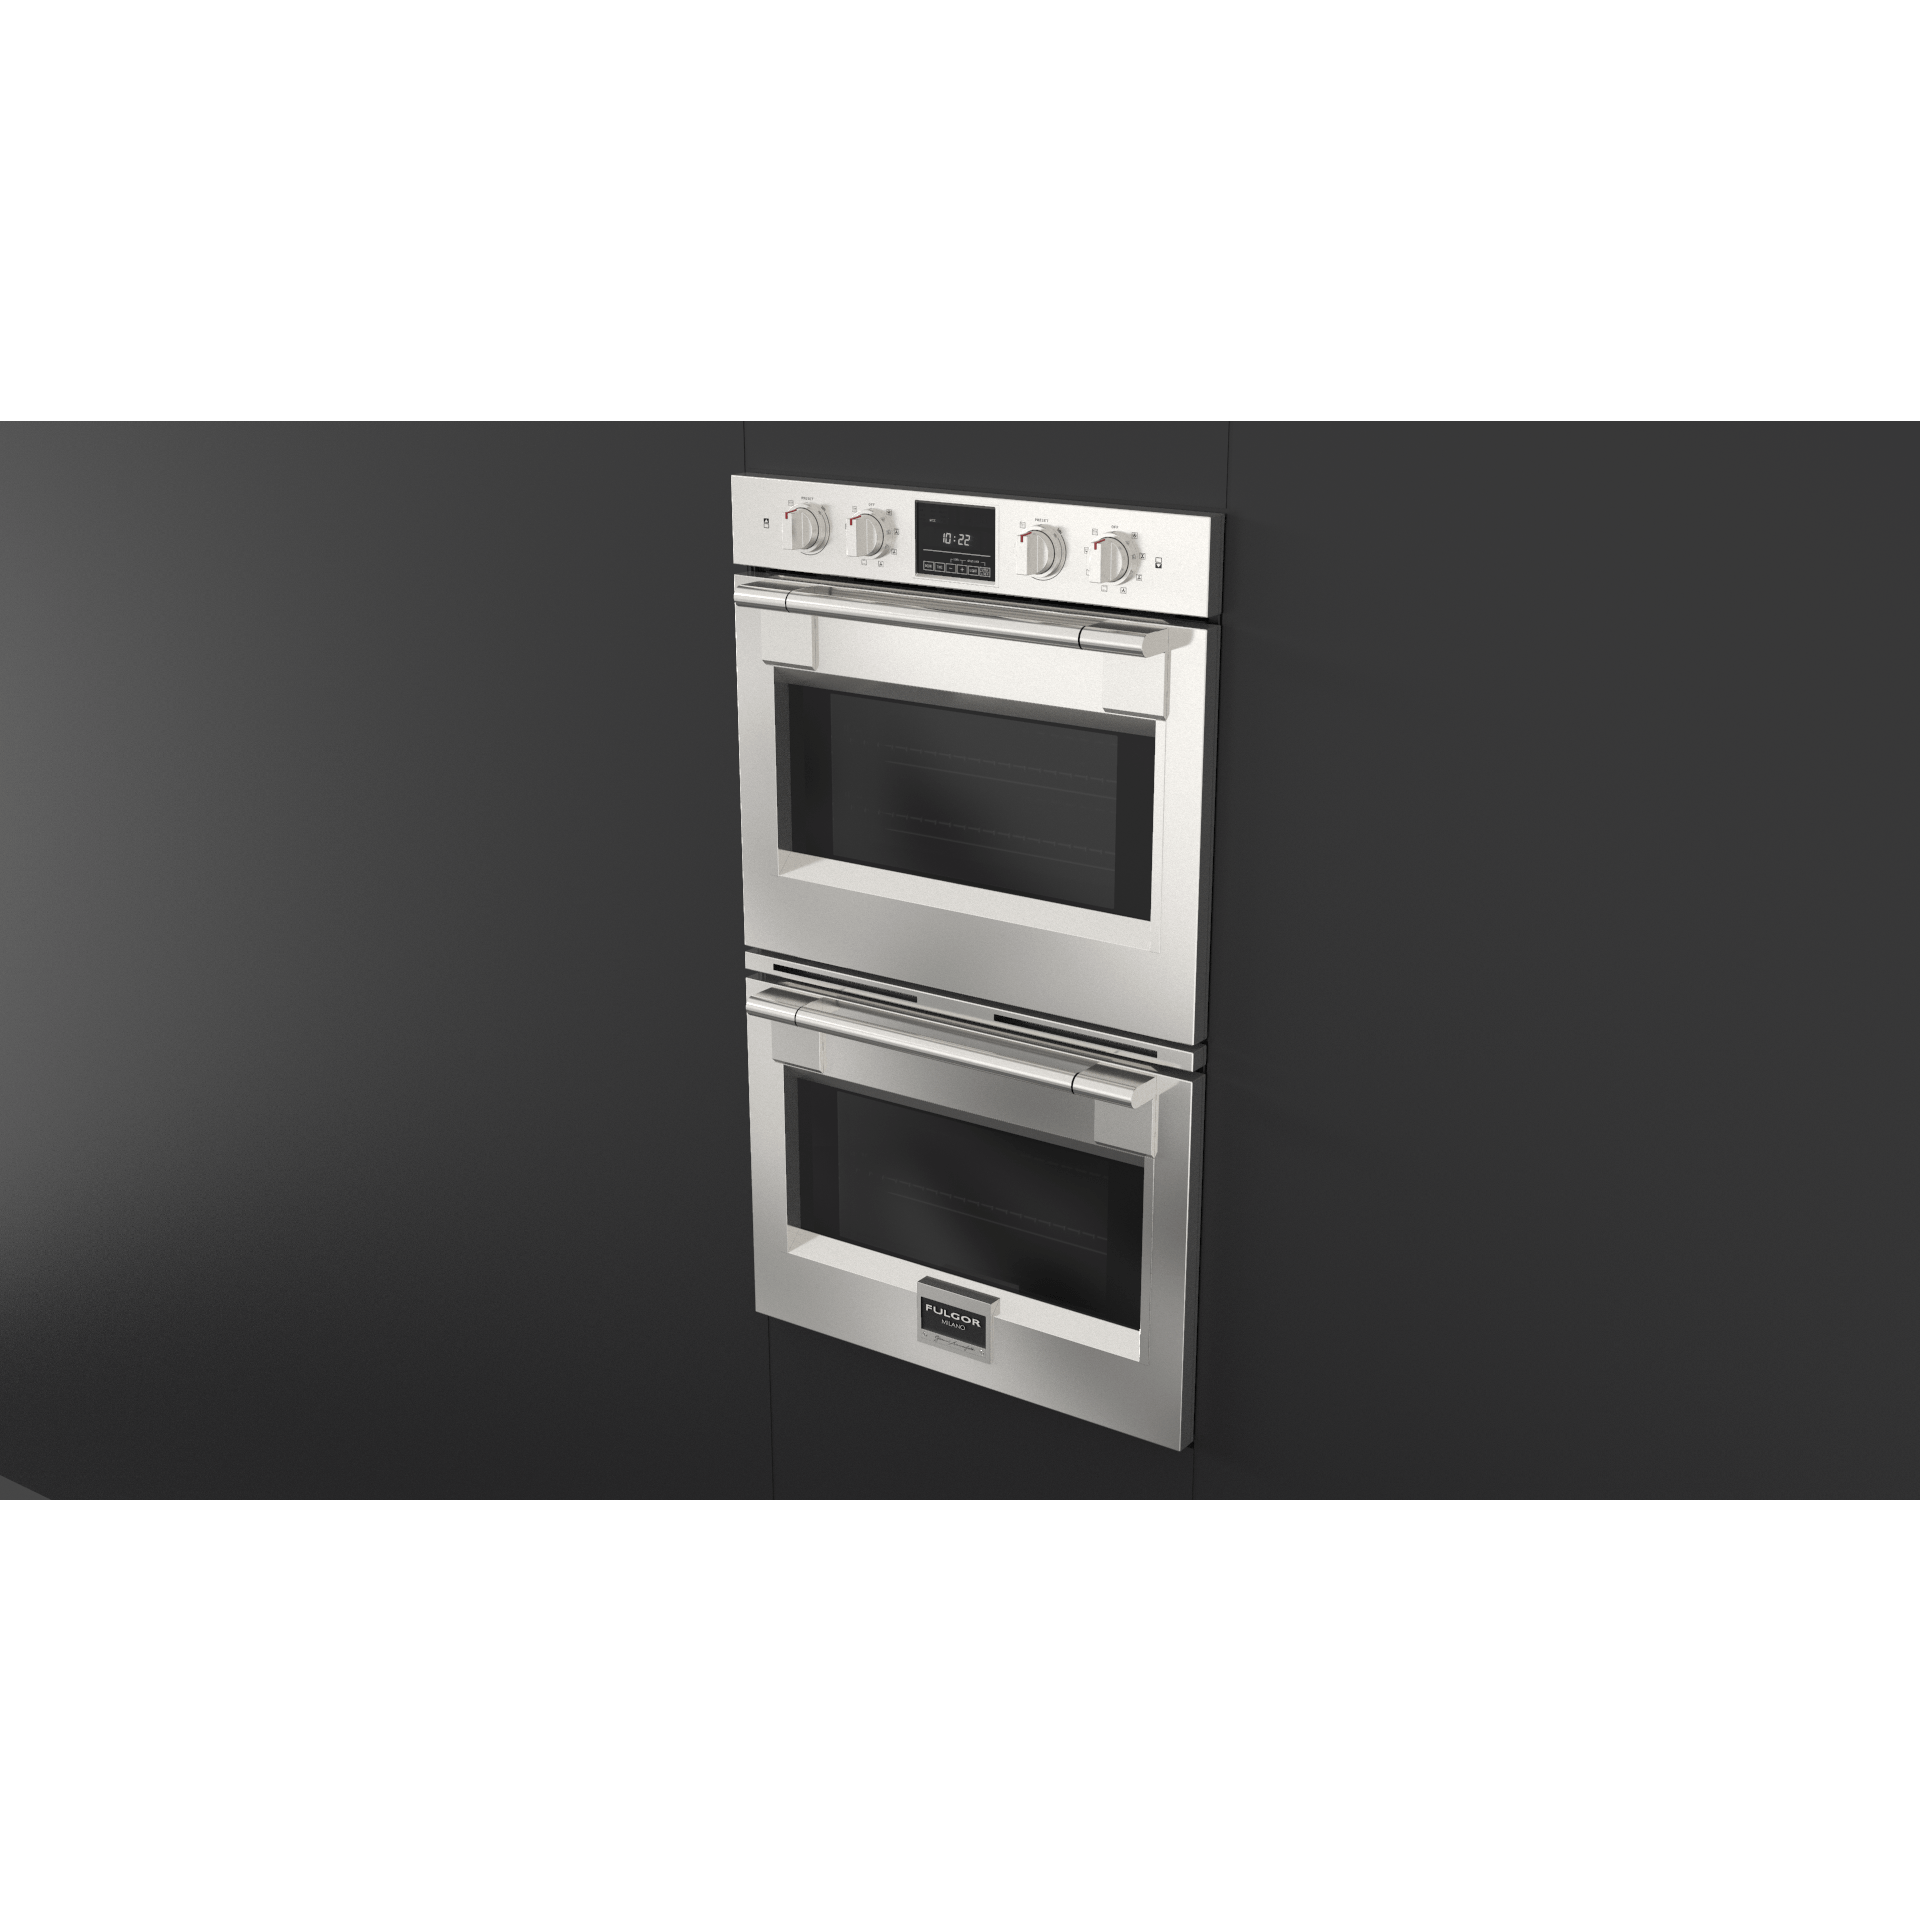 Fulgor Milano Package 30" Double Electric Wall Oven, 36" French Door Refrigerator, 30" Induction Rangetop, 30" Wall Mount Hood and 24" Integrated Built-In Dishwasher Wall Oven F6PDP30S1F6IRT304S1 Luxury Appliances Direct